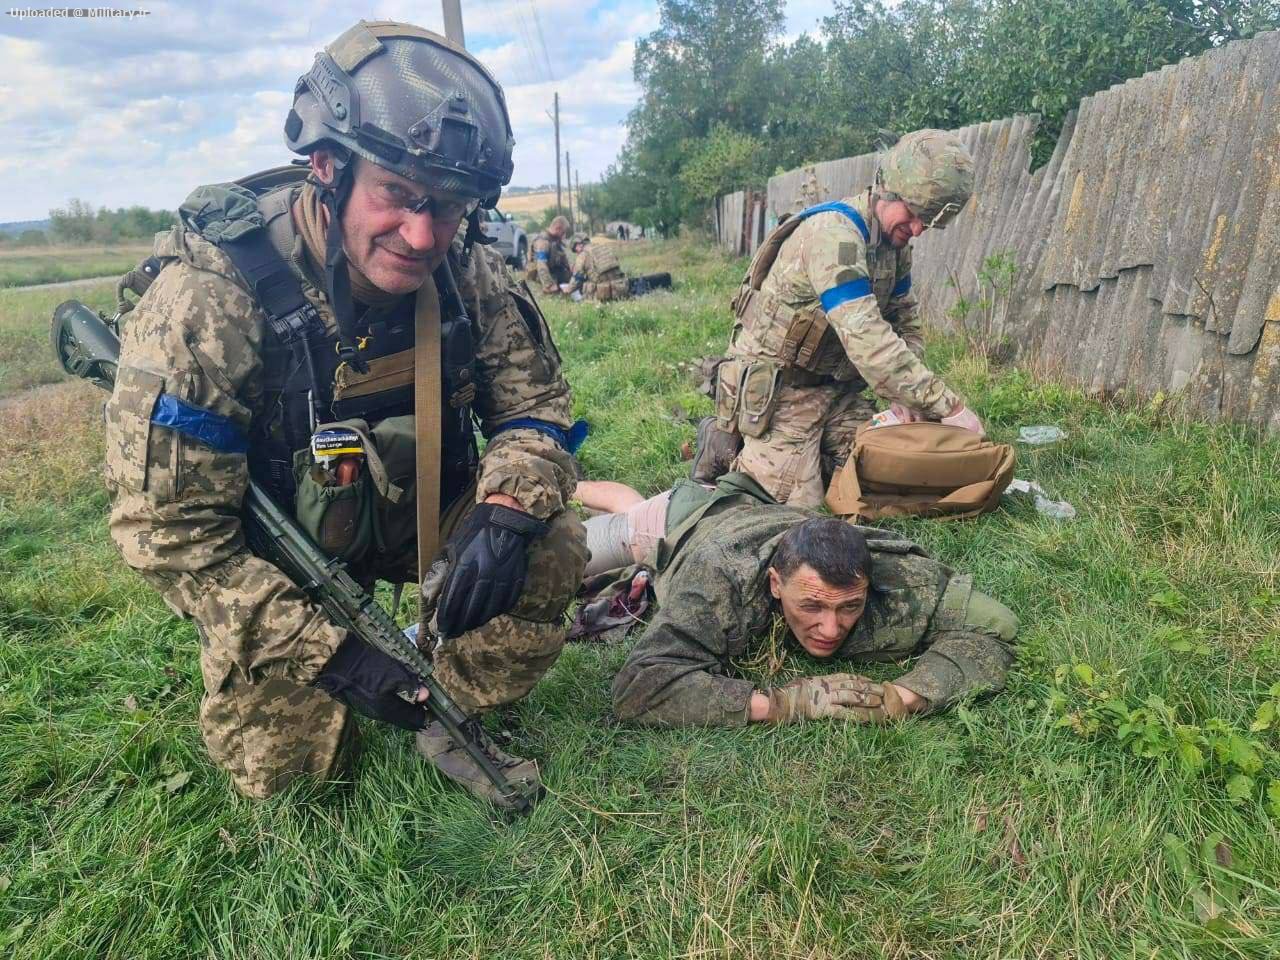 The_capture_of_a_RU_soldier_from_79th_Se